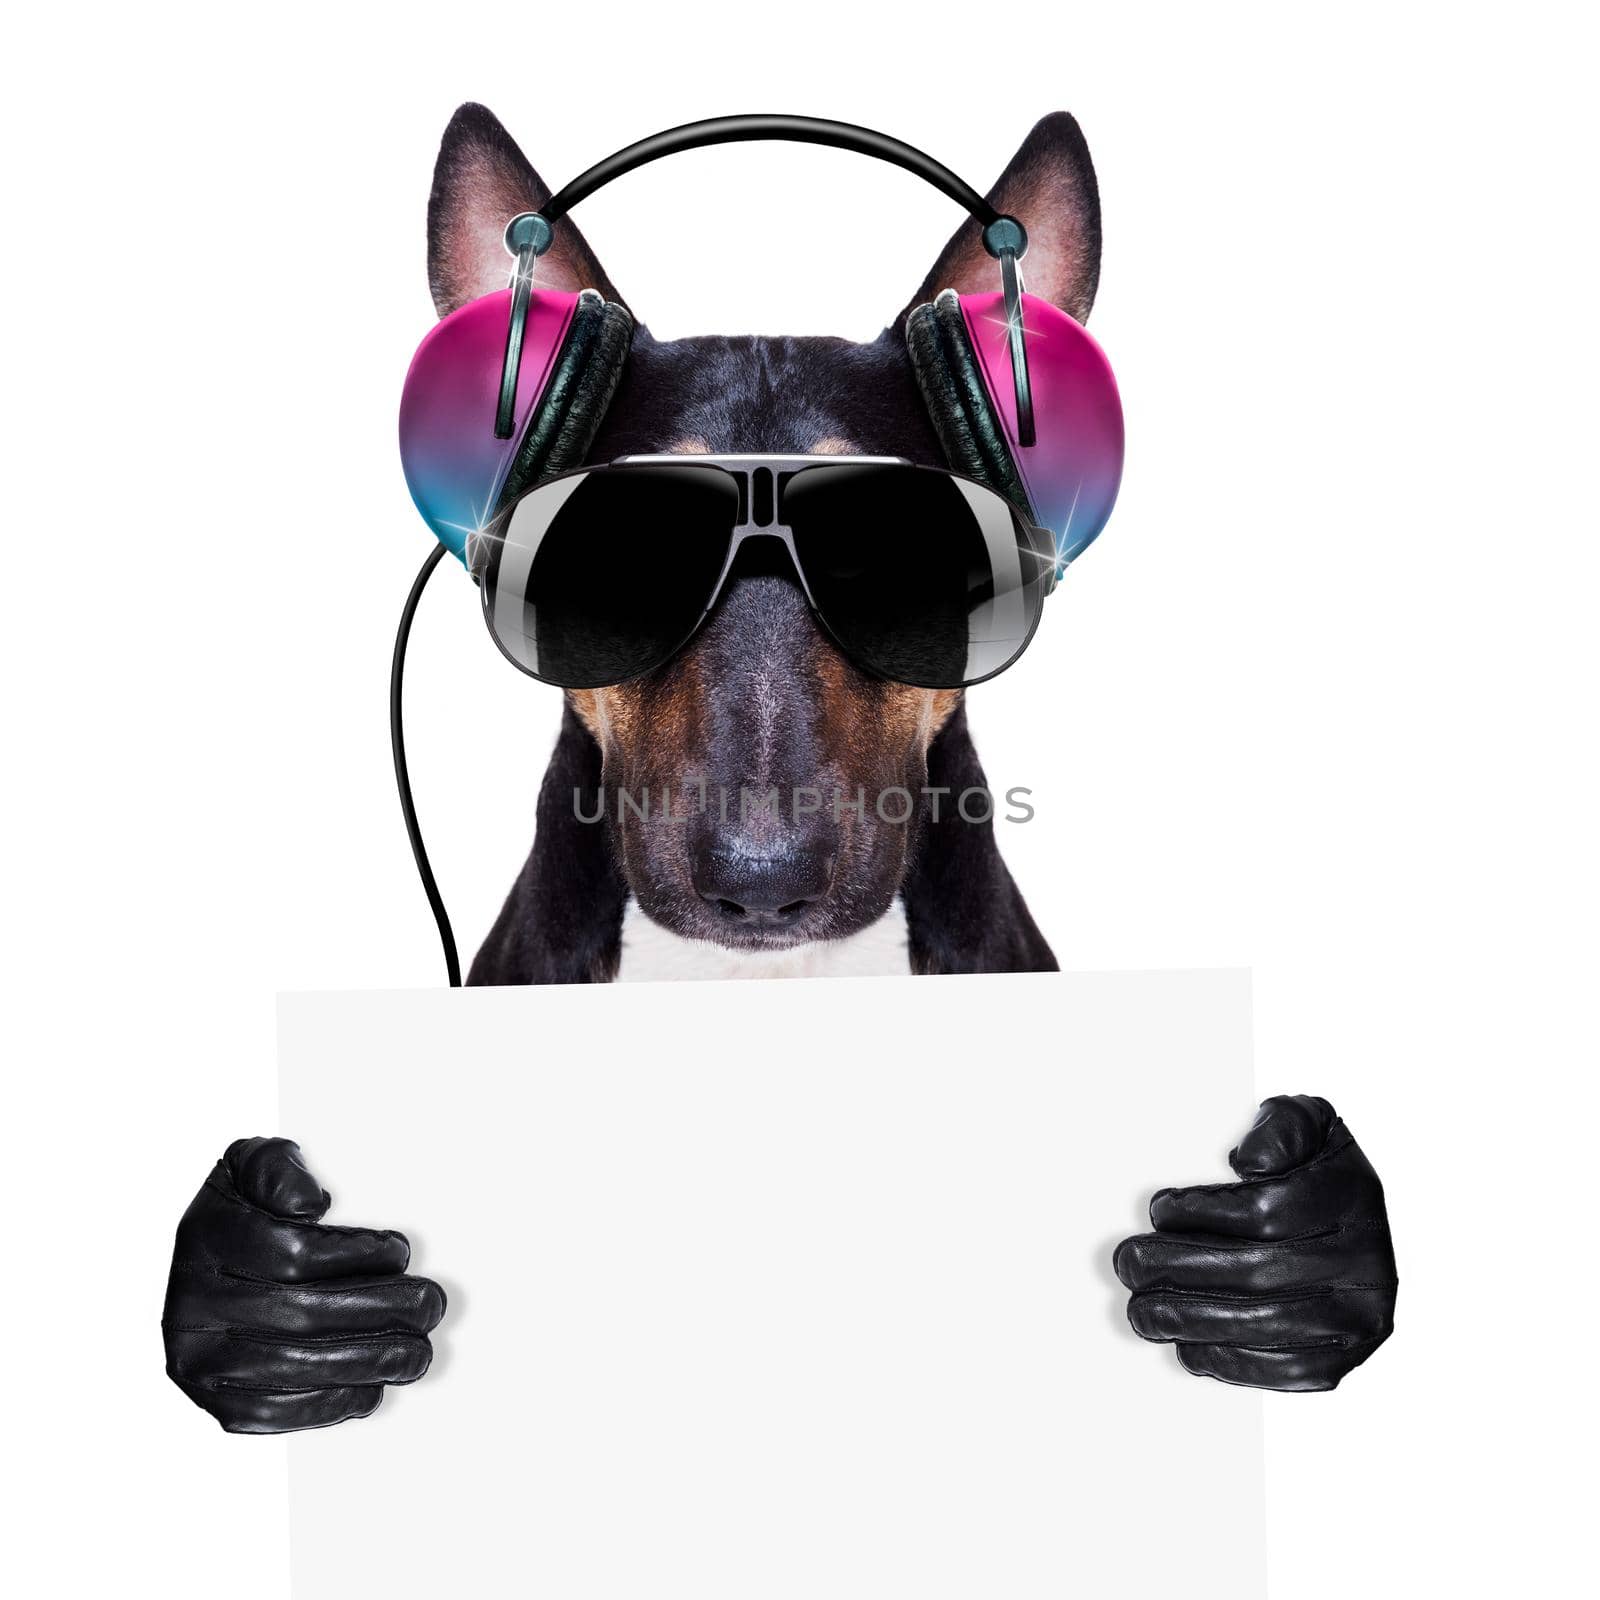 Dj bull terrier dog playing music in a club with disco ball , isolated on white background, making a selfie